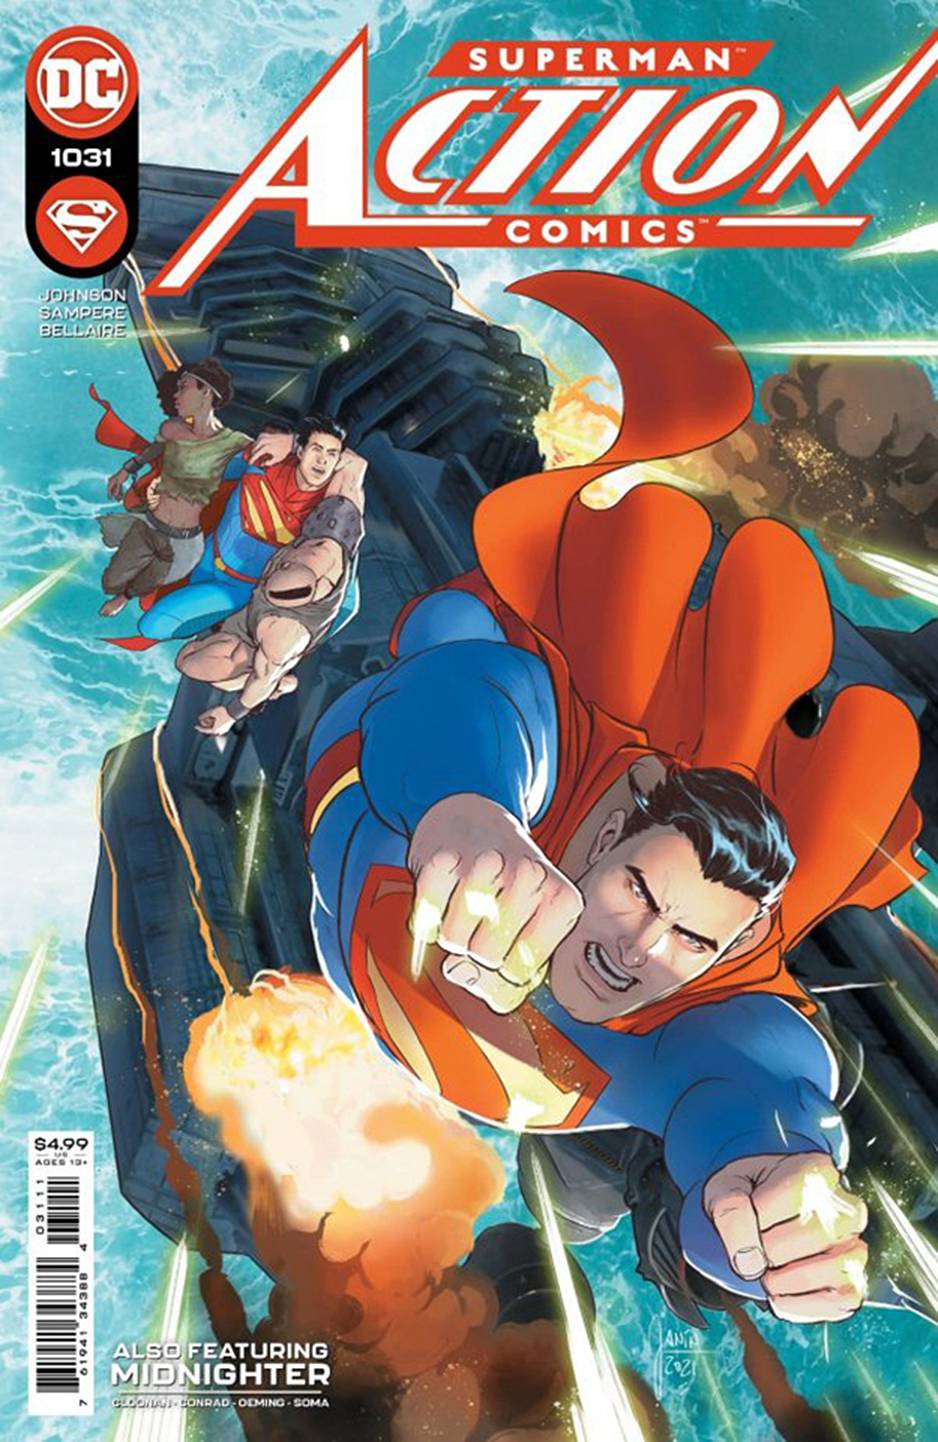 DF ACTION COMICS #1031 KENNEDY JOHNSON SGN